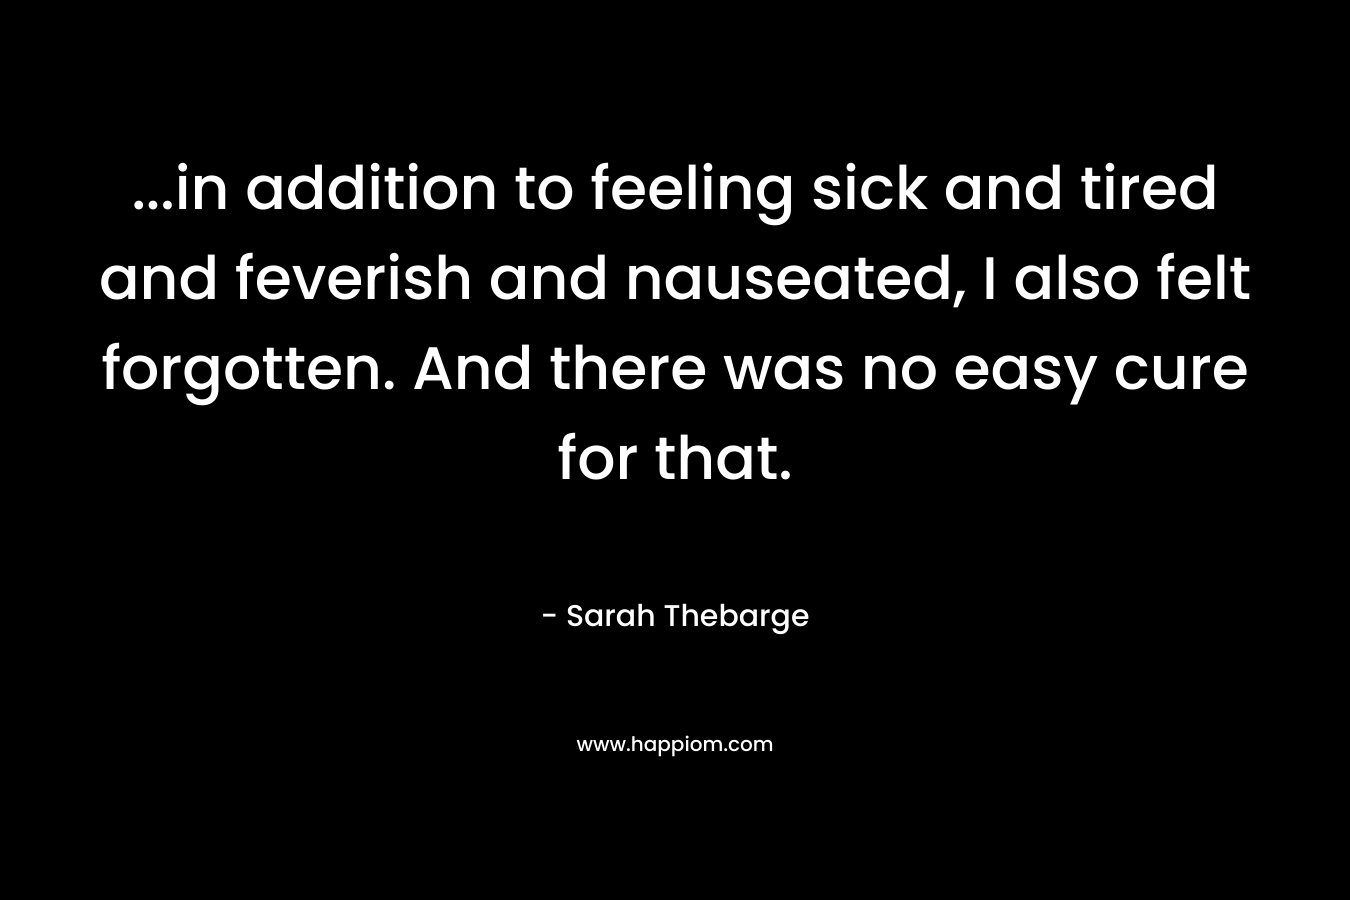 …in addition to feeling sick and tired and feverish and nauseated, I also felt forgotten. And there was no easy cure for that. – Sarah Thebarge